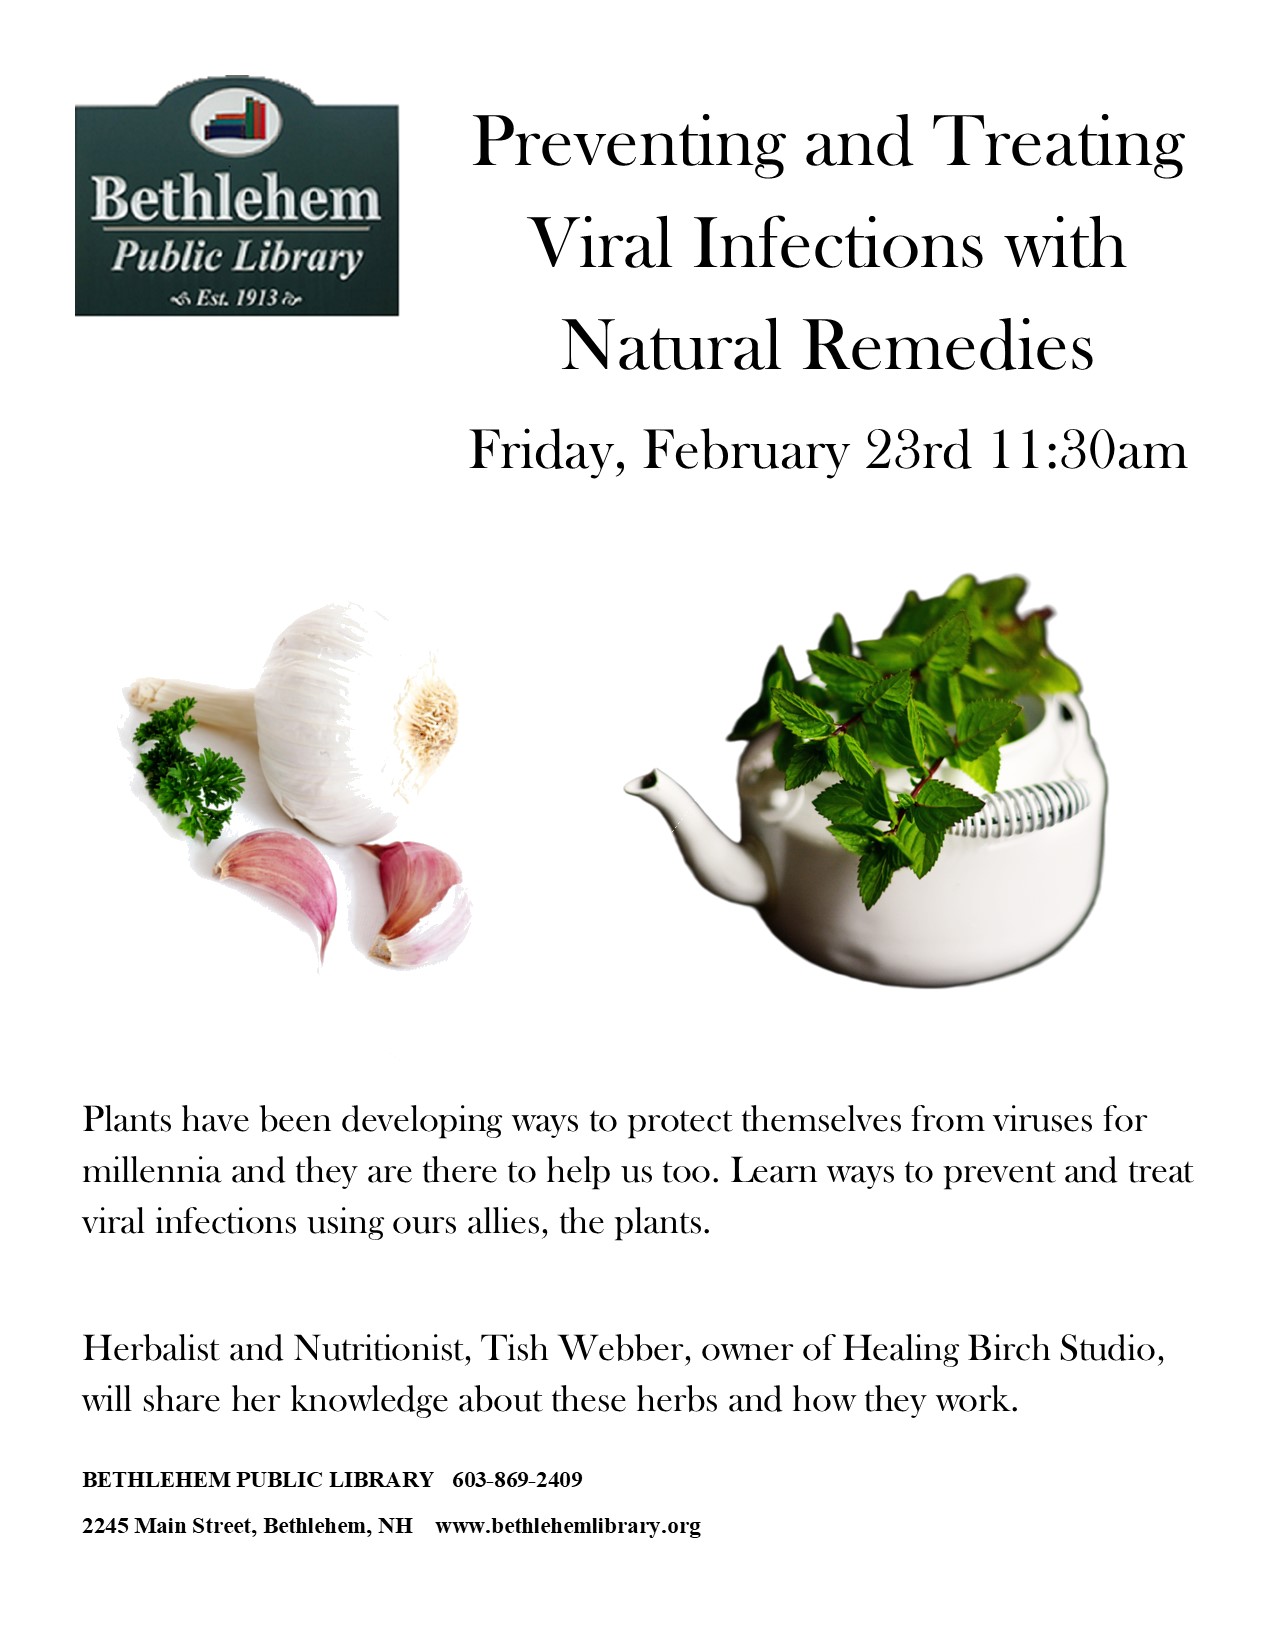 Preventing and Treating Viral Infections with Natural Remedies  Friday, February 23rd 11:30am